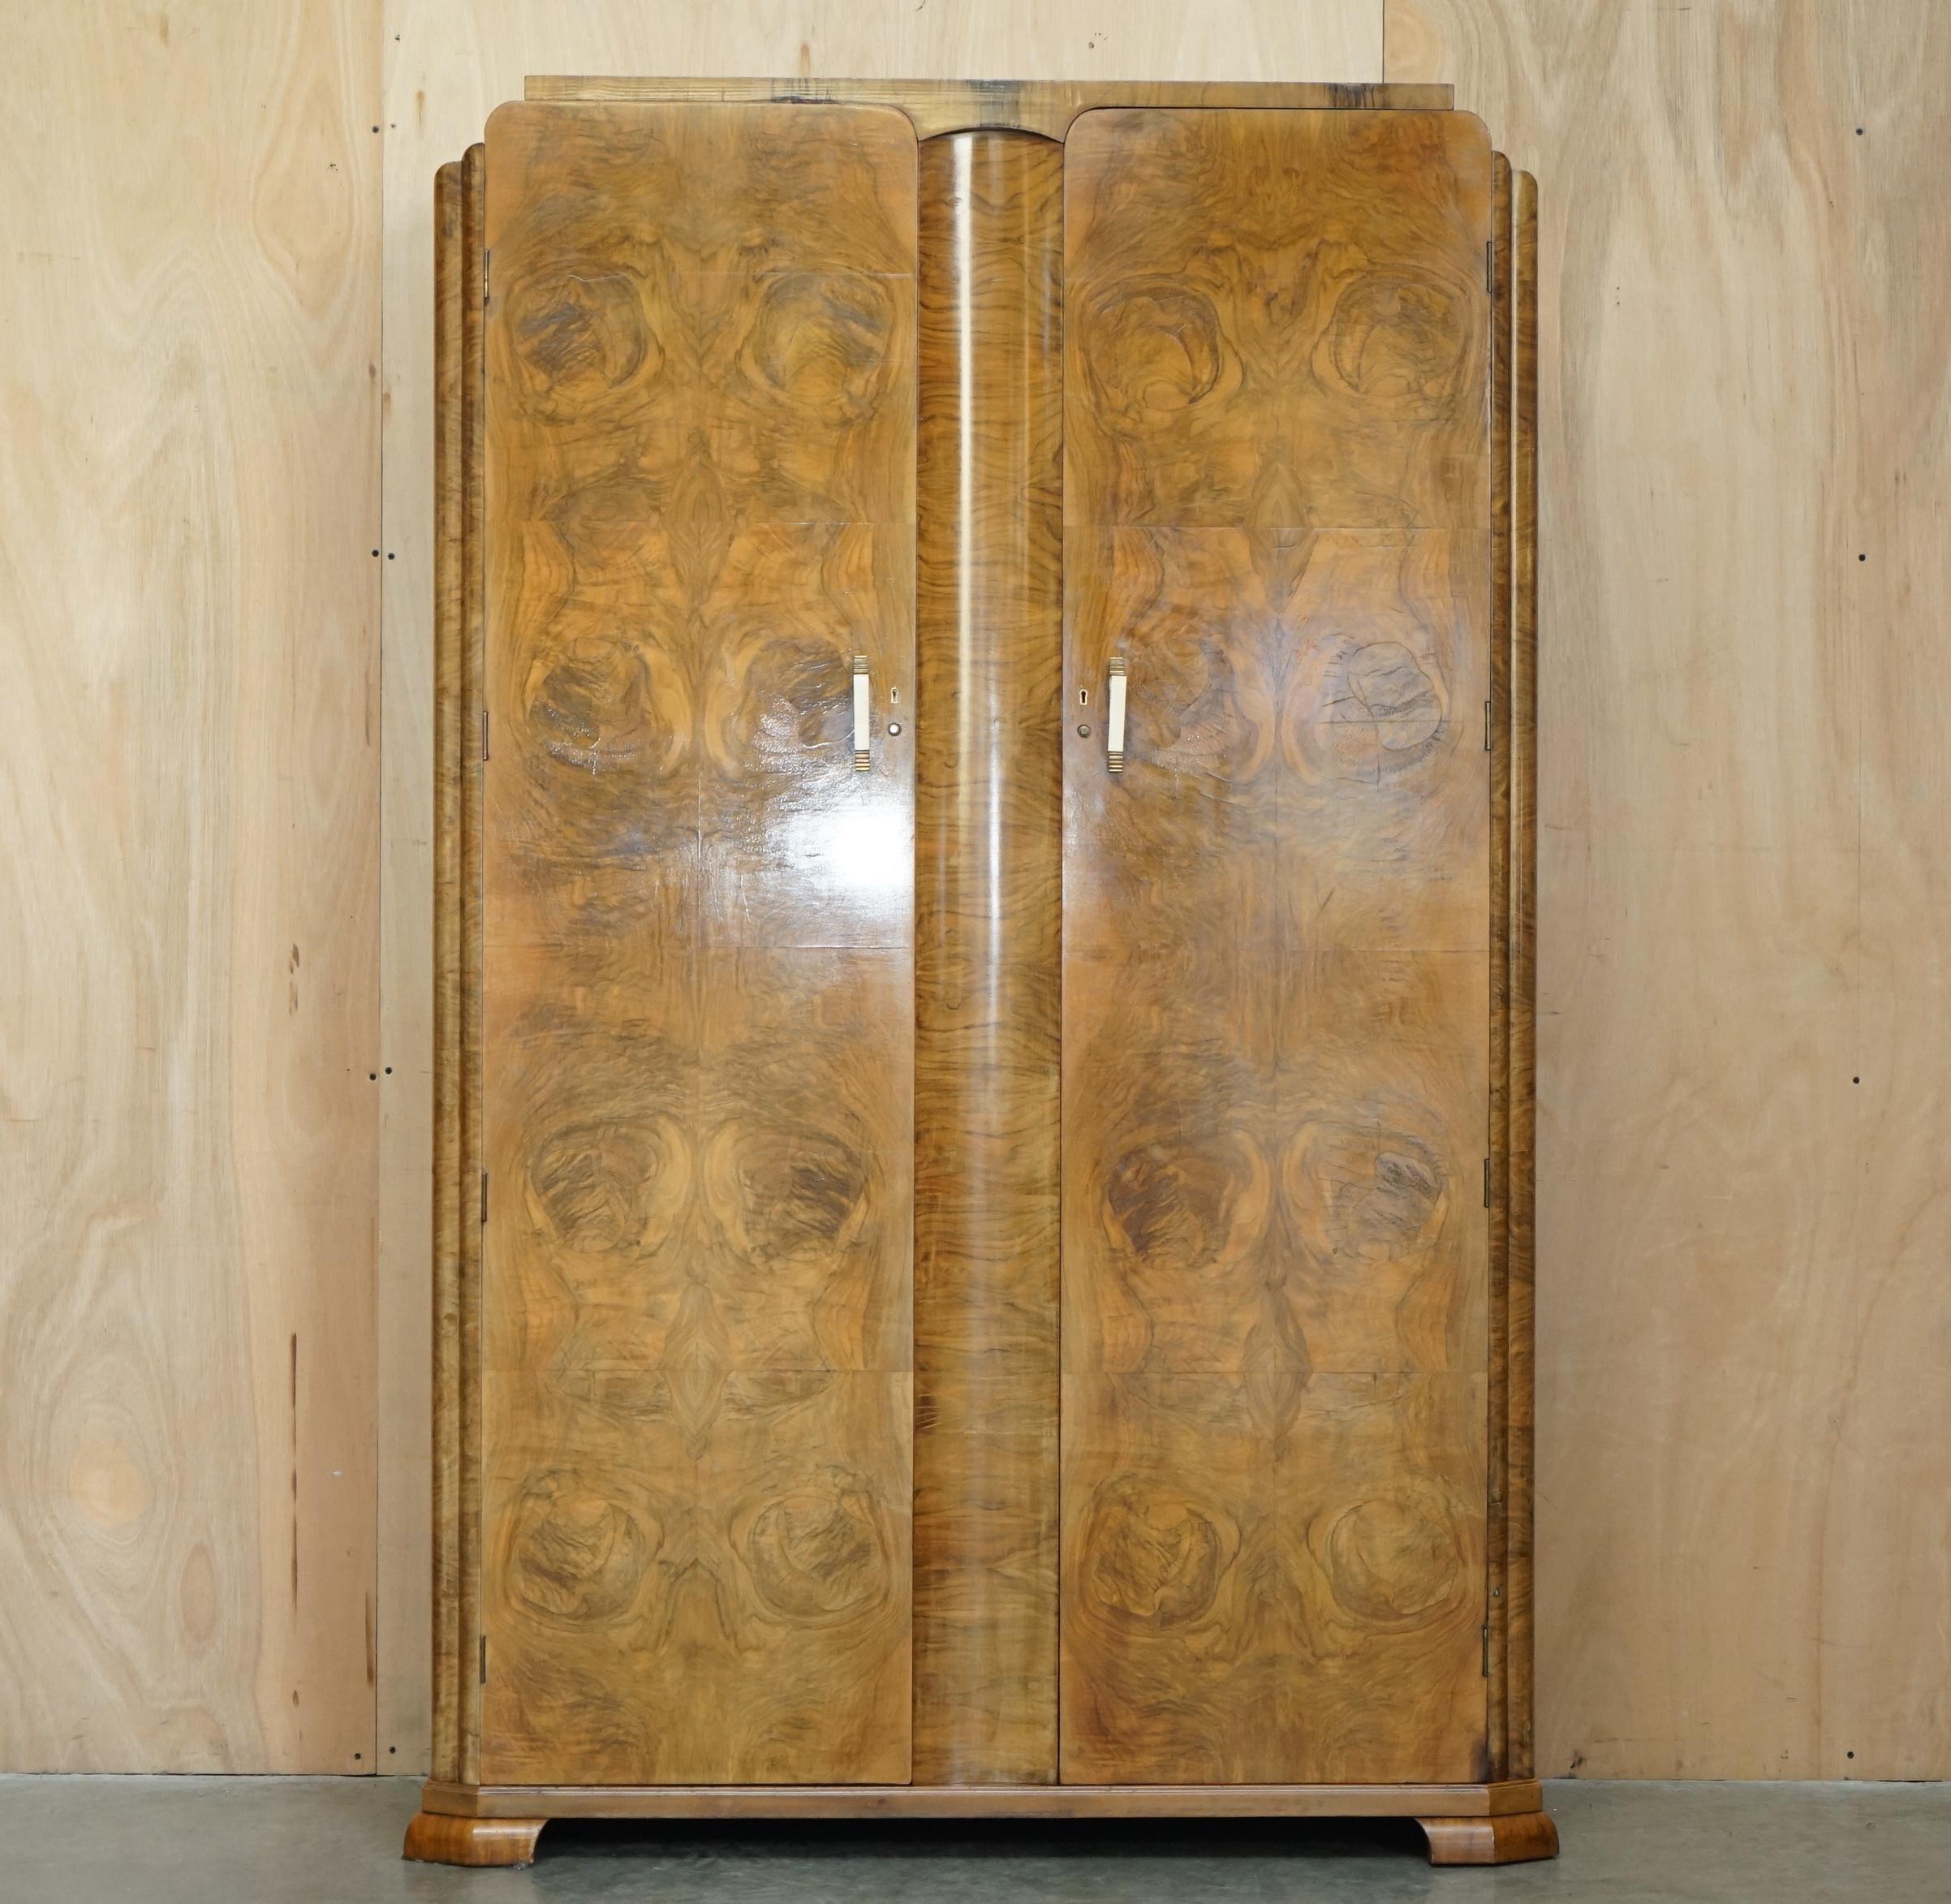 Royal House Antiques

Royal House Antiques is delighted to offer for sale this lovely satin Walnut Art Deco circa 1930's large double wardrobe which is part of a suite

Please note the delivery fee listed is just a guide, it covers within the M25